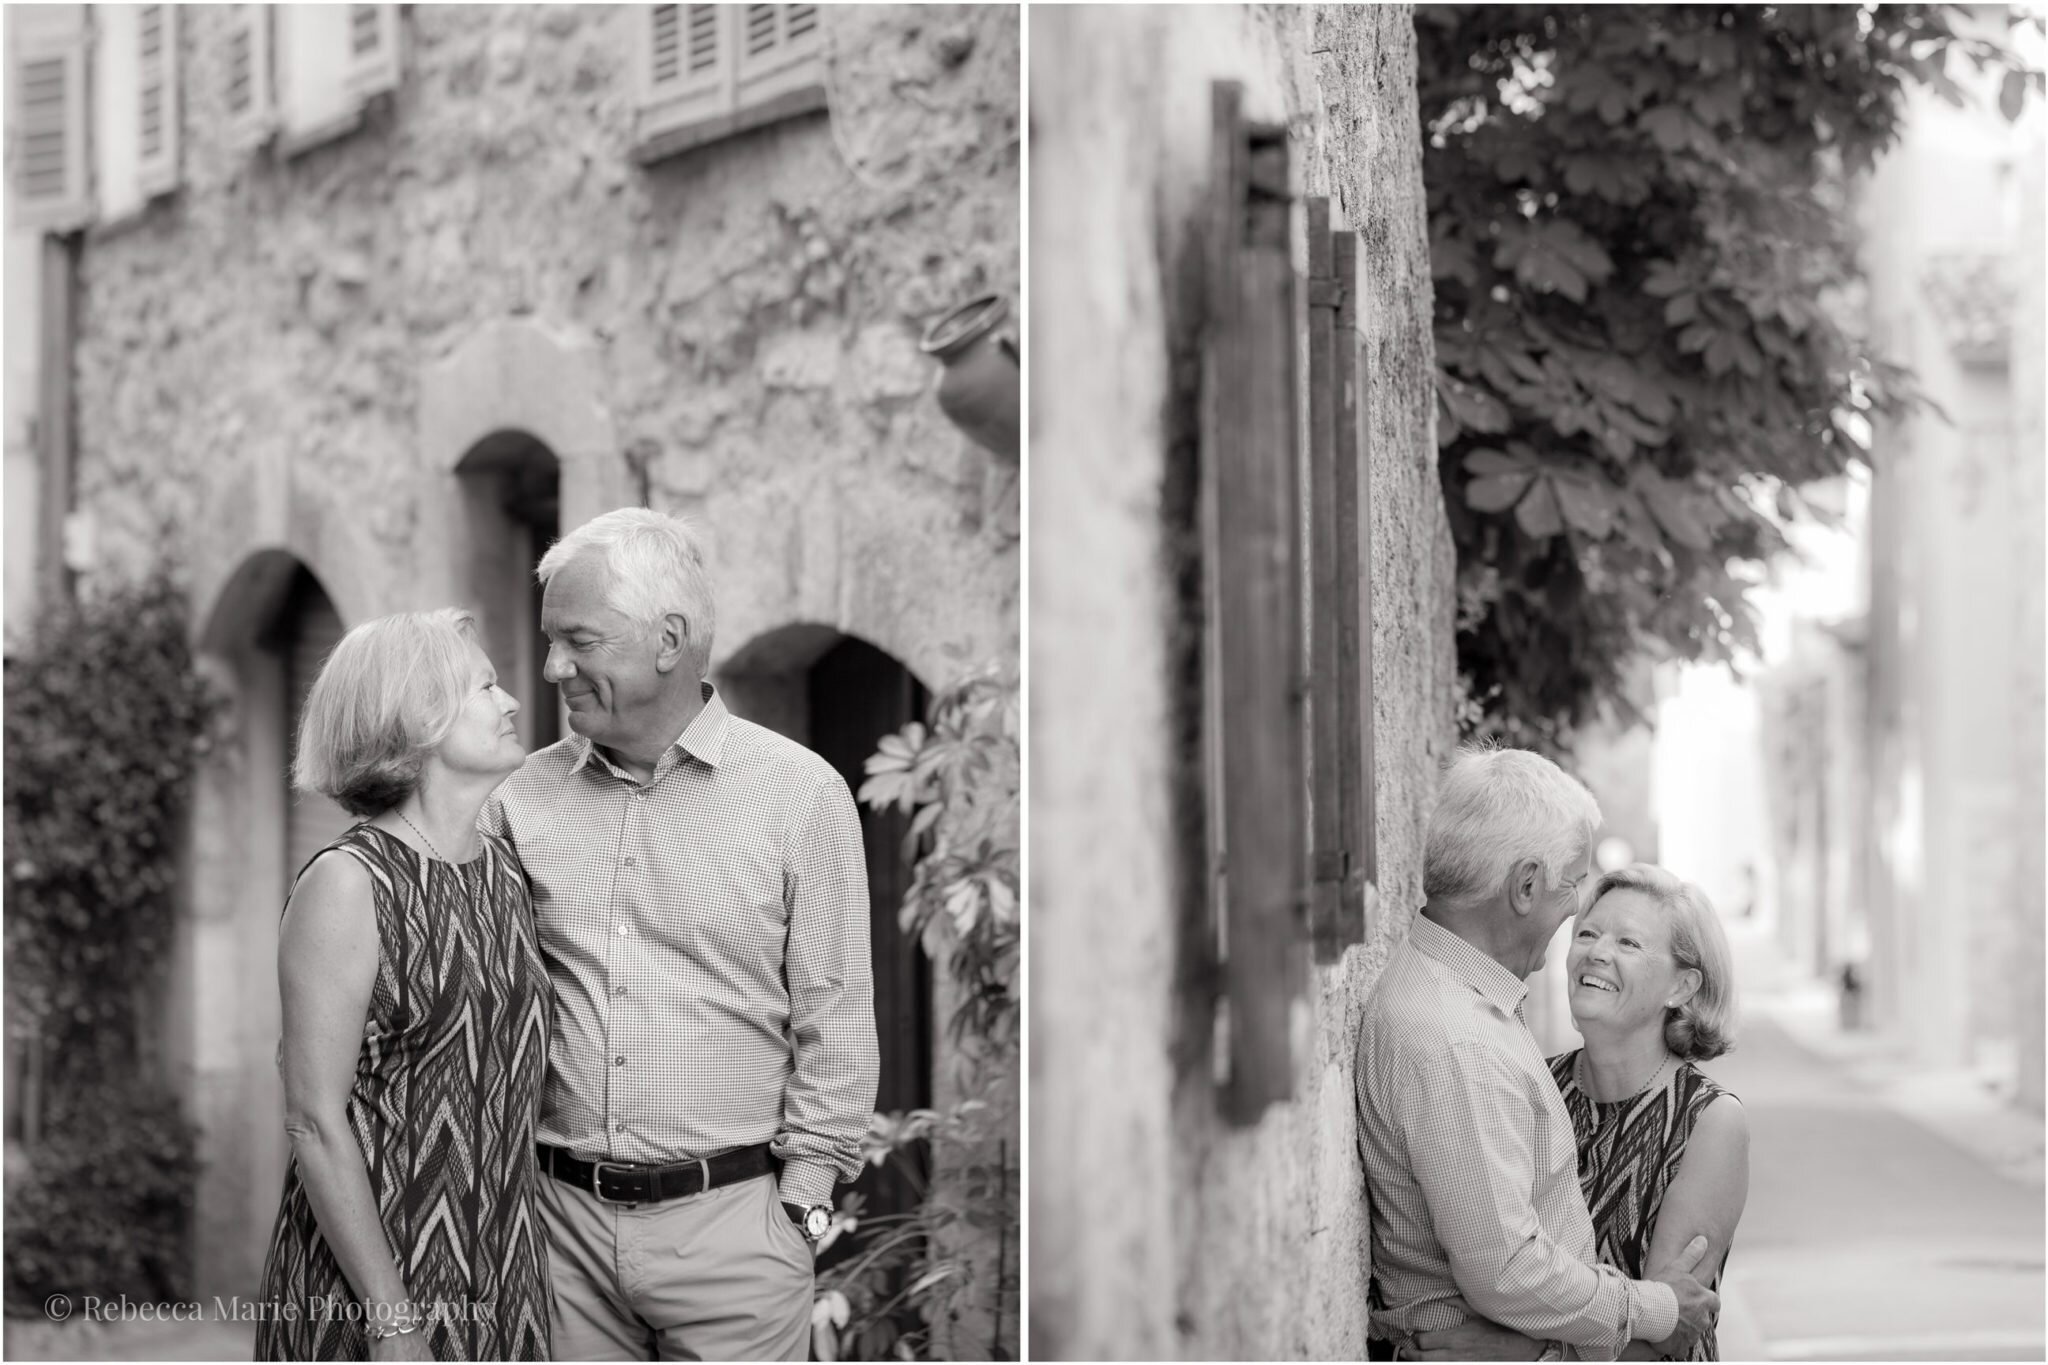 Portraits-in-France-Valbonne-Rebecca-Marie-Photography-18-4-1